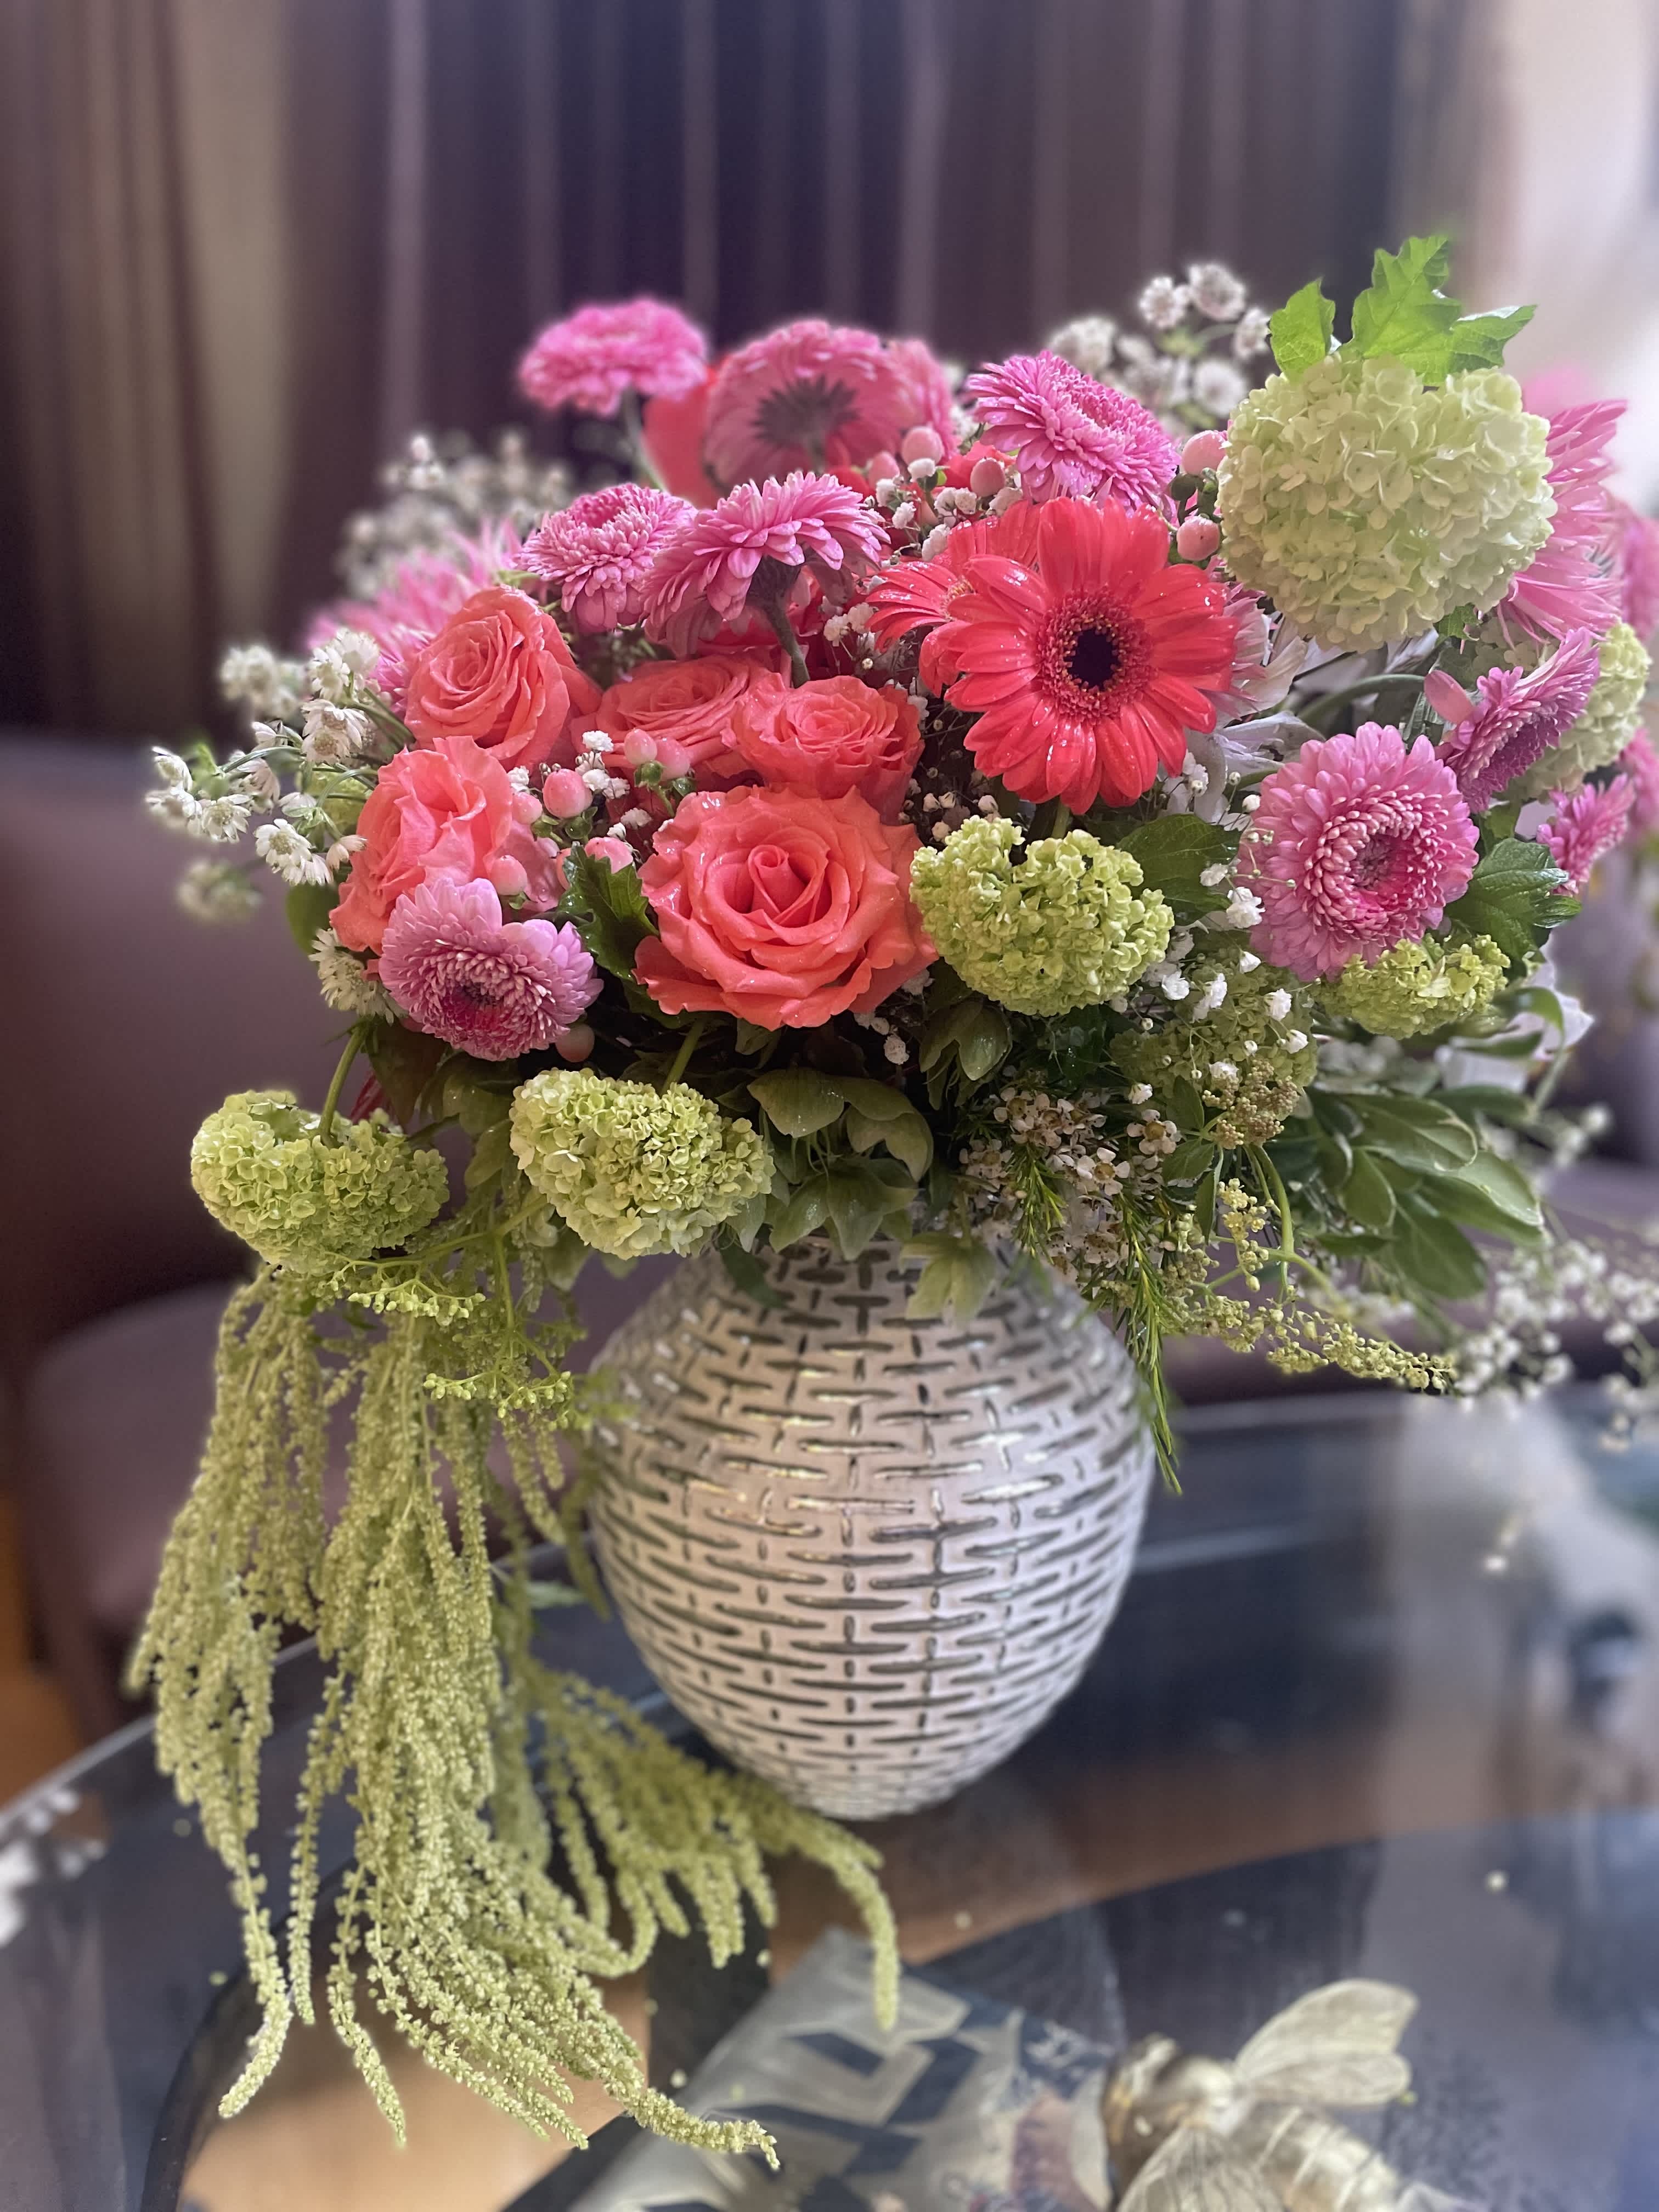 Mesmerizing bouquet  - Gorgeous flowers in colorful composition to celebrate beautiful you. We will use peonies , roses, gerbera daisies and more to create lavish composition to marvel and feel loved.